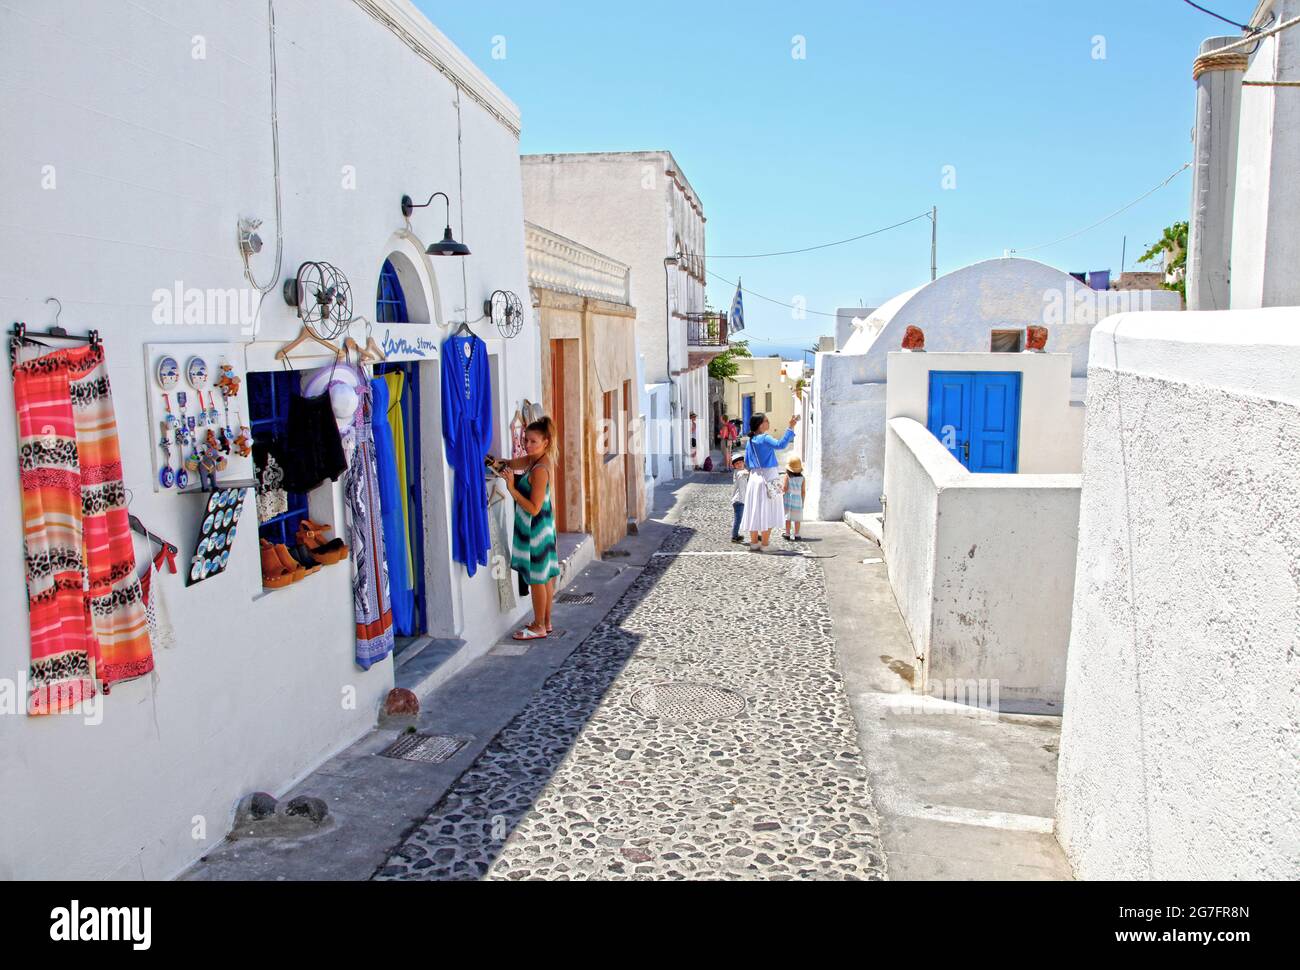 A souvenir shop in the traditional village of Megalochori on the island of Santorini in Greece. Stock Photo